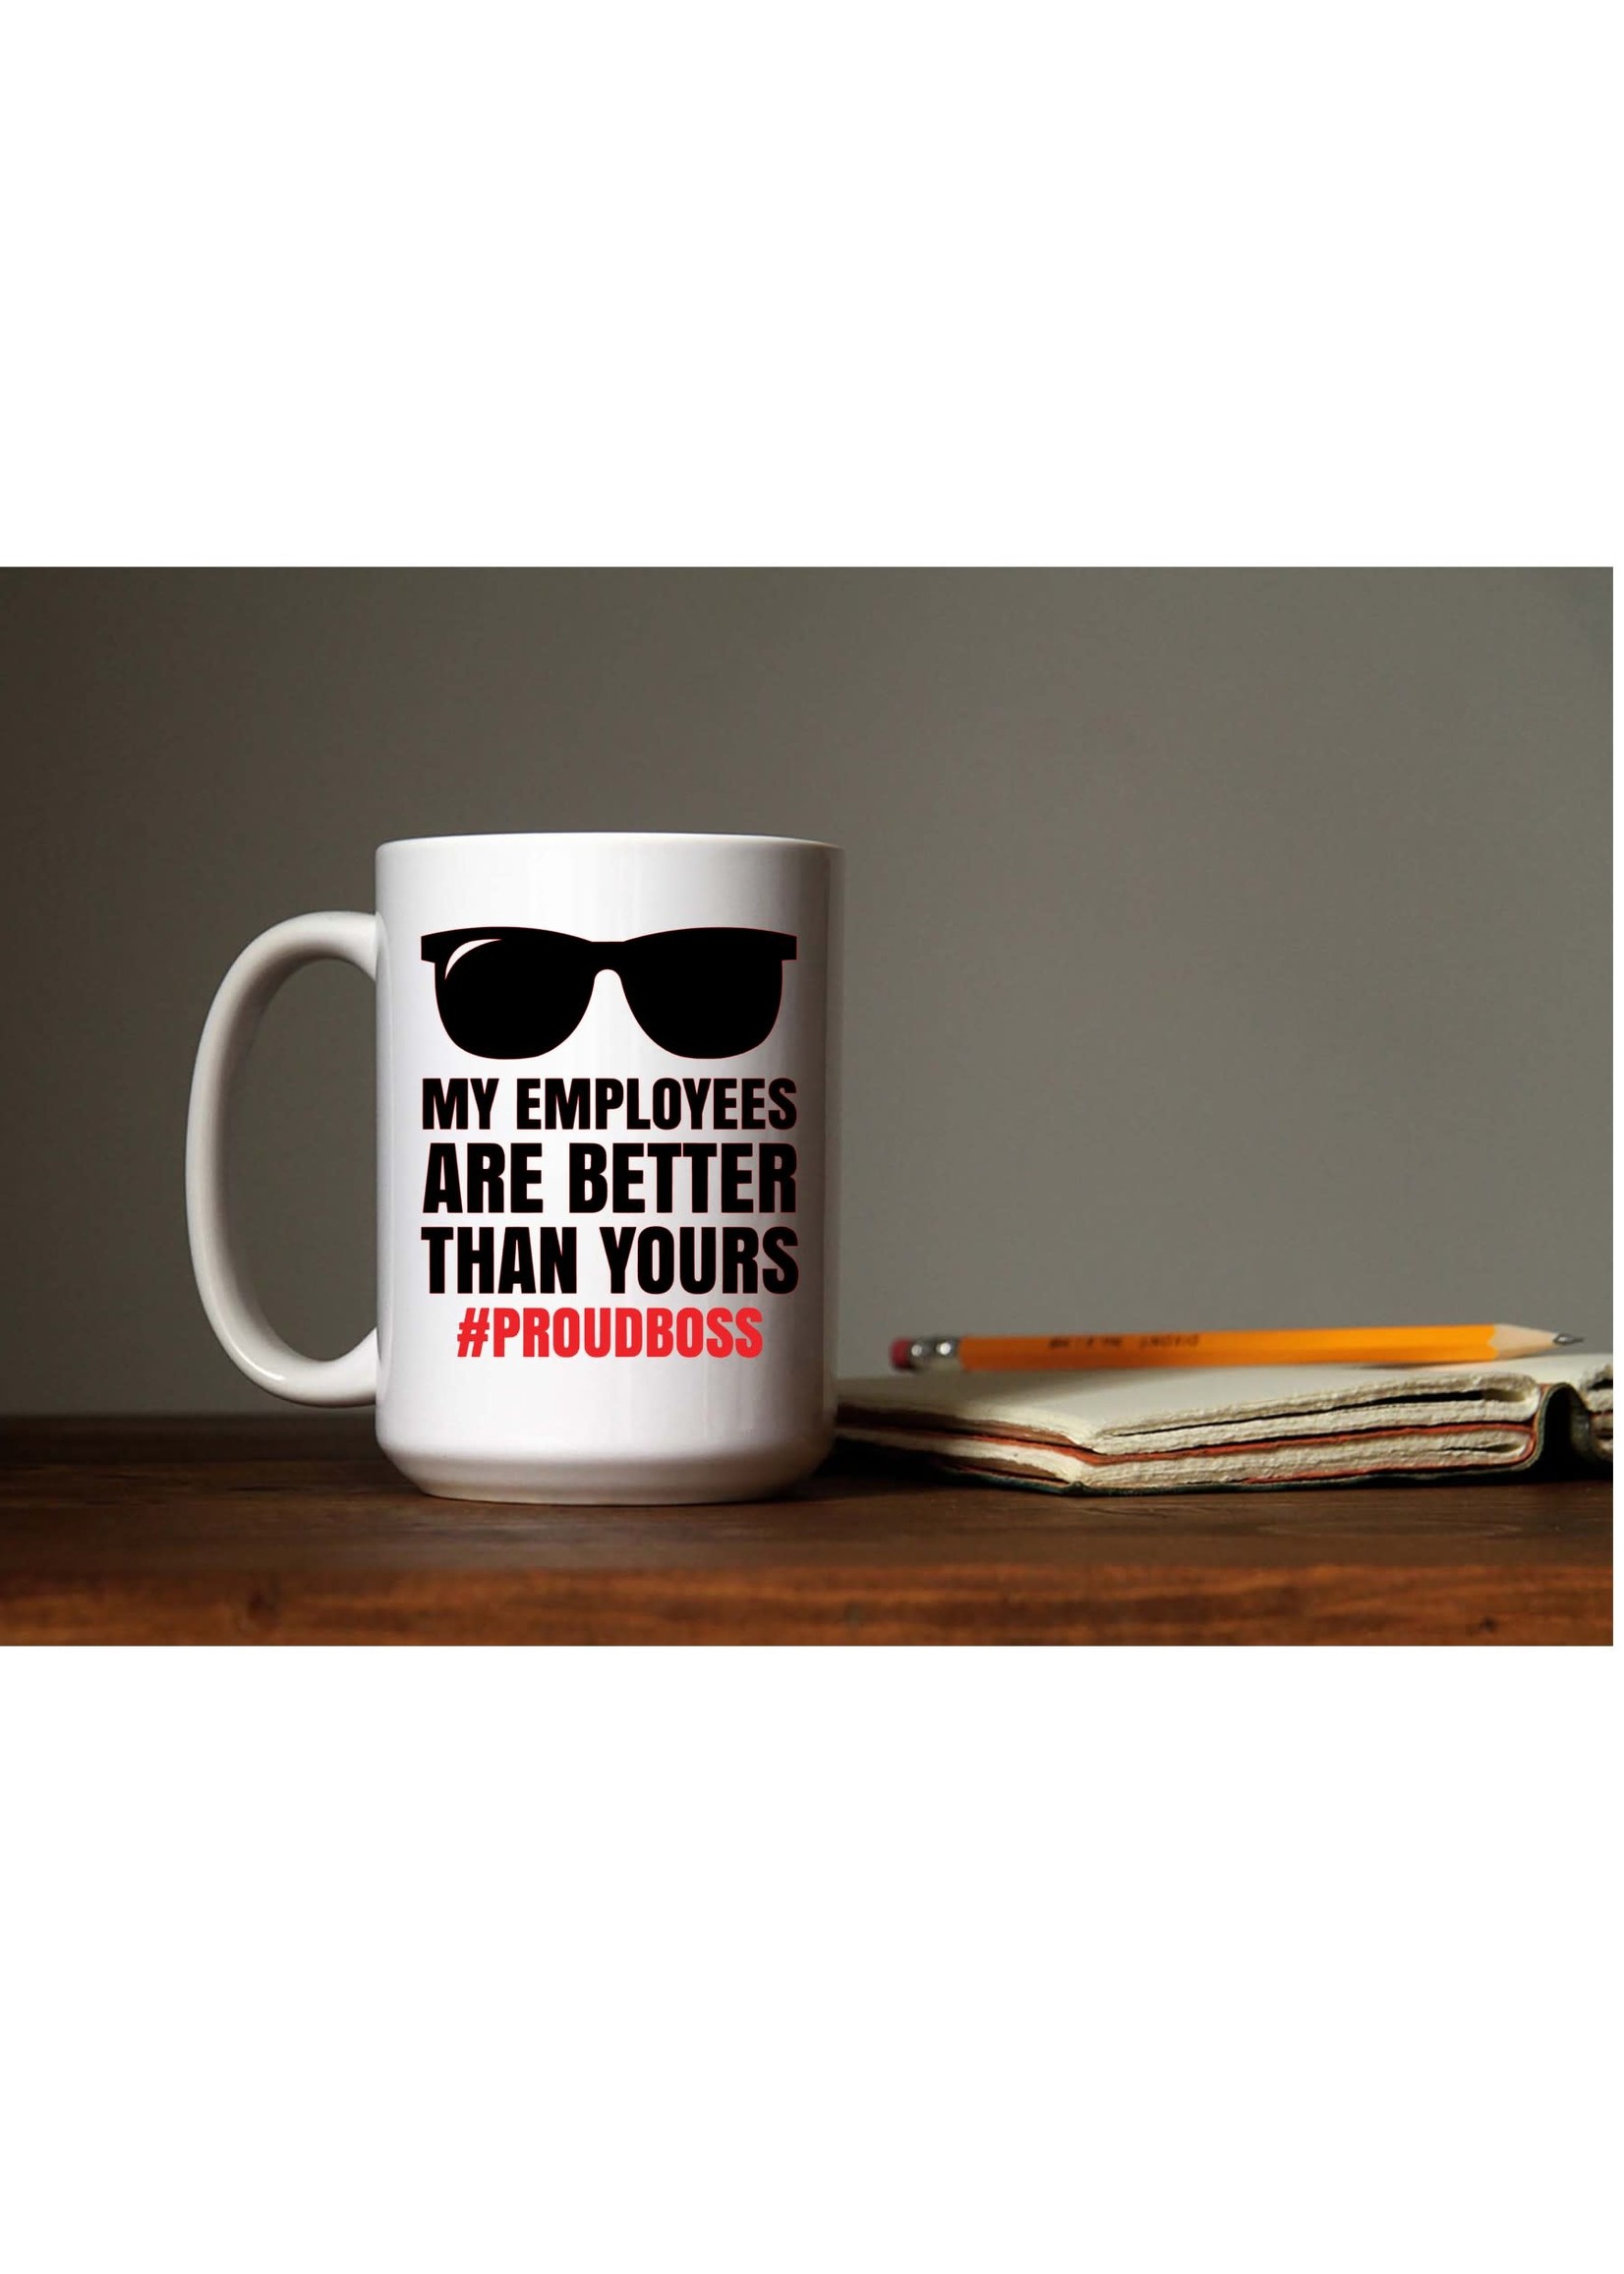 My Employees are Better than yours mug